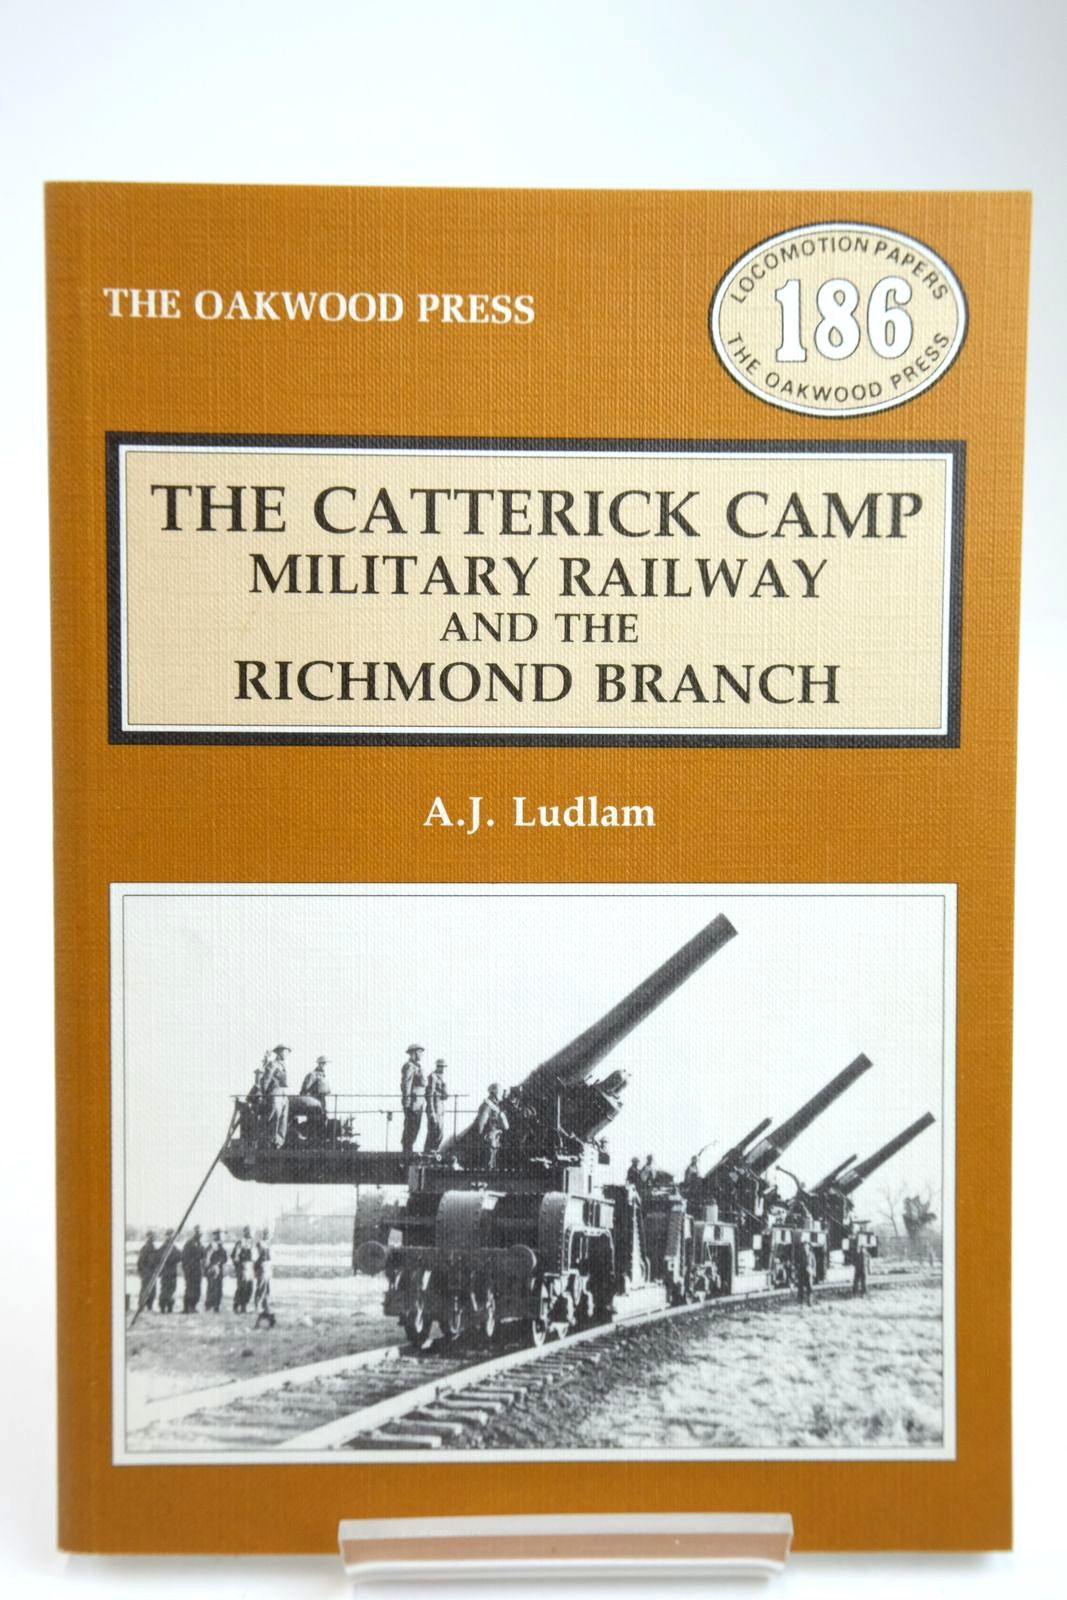 Photo of THE CATTERICK CAMP MILITARY RAILWAY AND THE RICHMOND BRANCH written by Ludlam, A.J. published by The Oakwood Press (STOCK CODE: 2133700)  for sale by Stella & Rose's Books